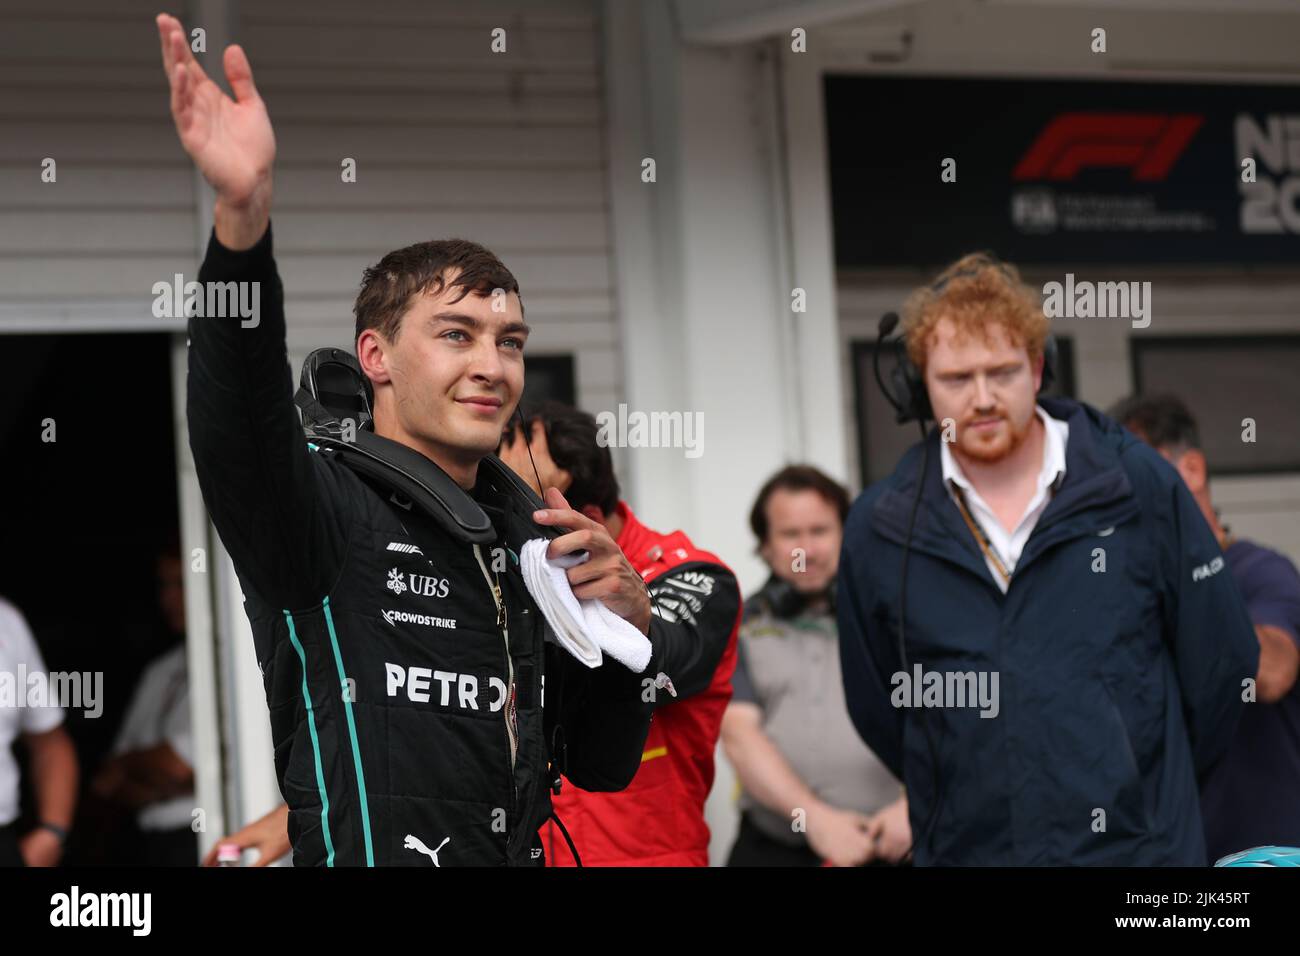 Mogyorod, Hungary. 30th July 2022; The Hungaroring, Mogyoród, Hungary: FIA Formula 1 Grand Prix, qualifying sessions: Mercedes AMG Petronas F1 Team, George Russell takes pole for tomorrows race Credit: Action Plus Sports Images/Alamy Live News Stock Photo